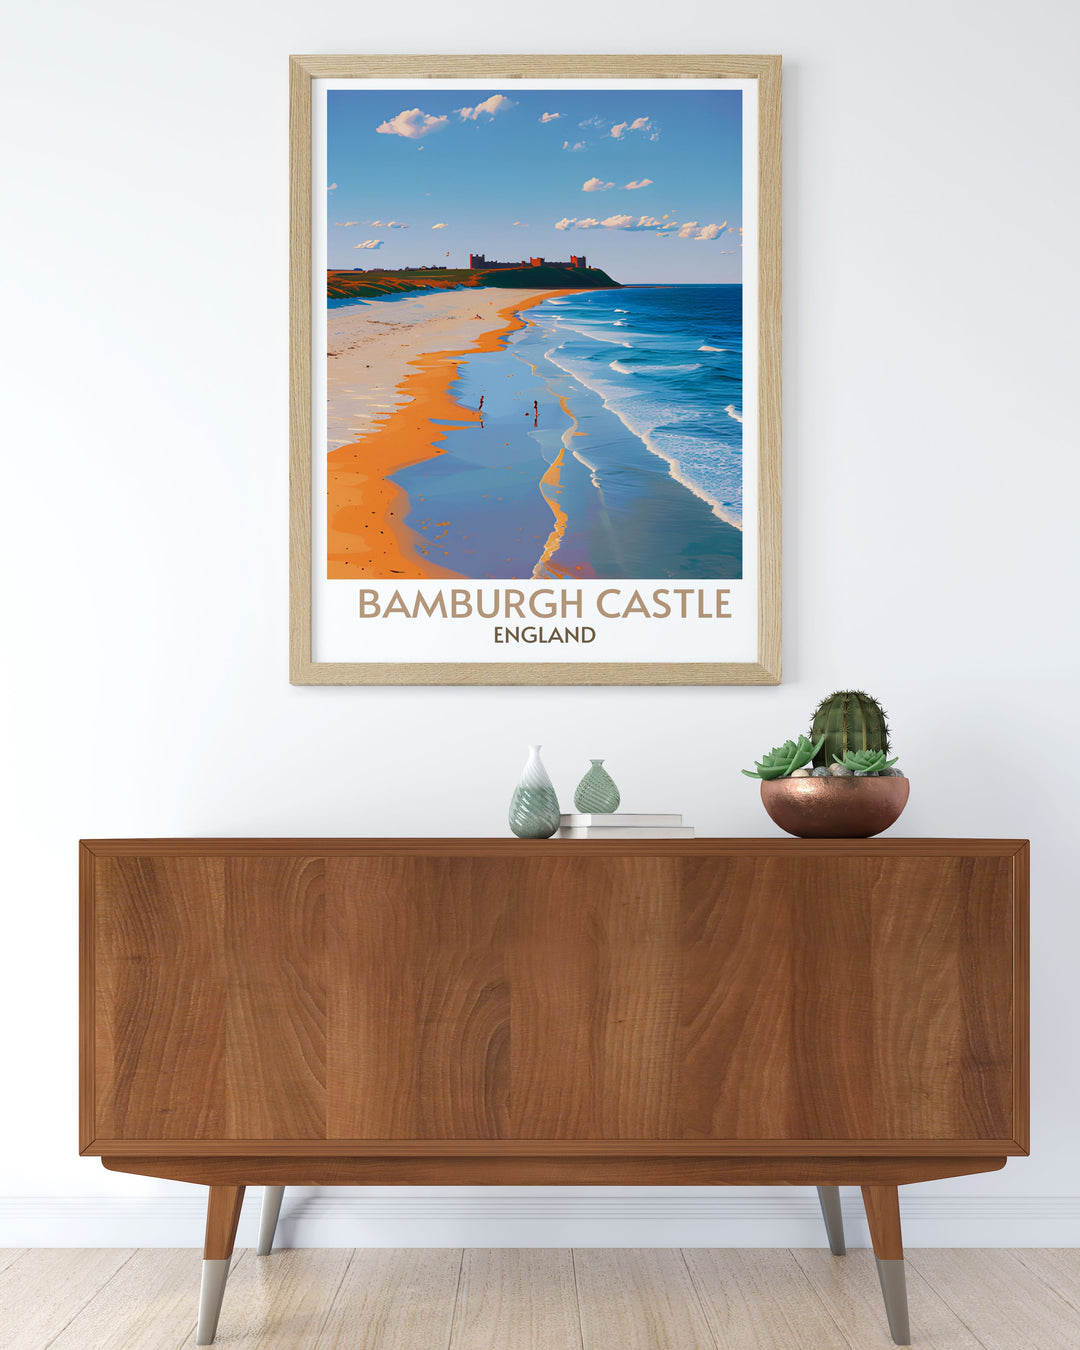 Detailed Bamburgh Beach poster capturing the scenic peace of the area, ideal for adding a touch of tranquility to any decor.